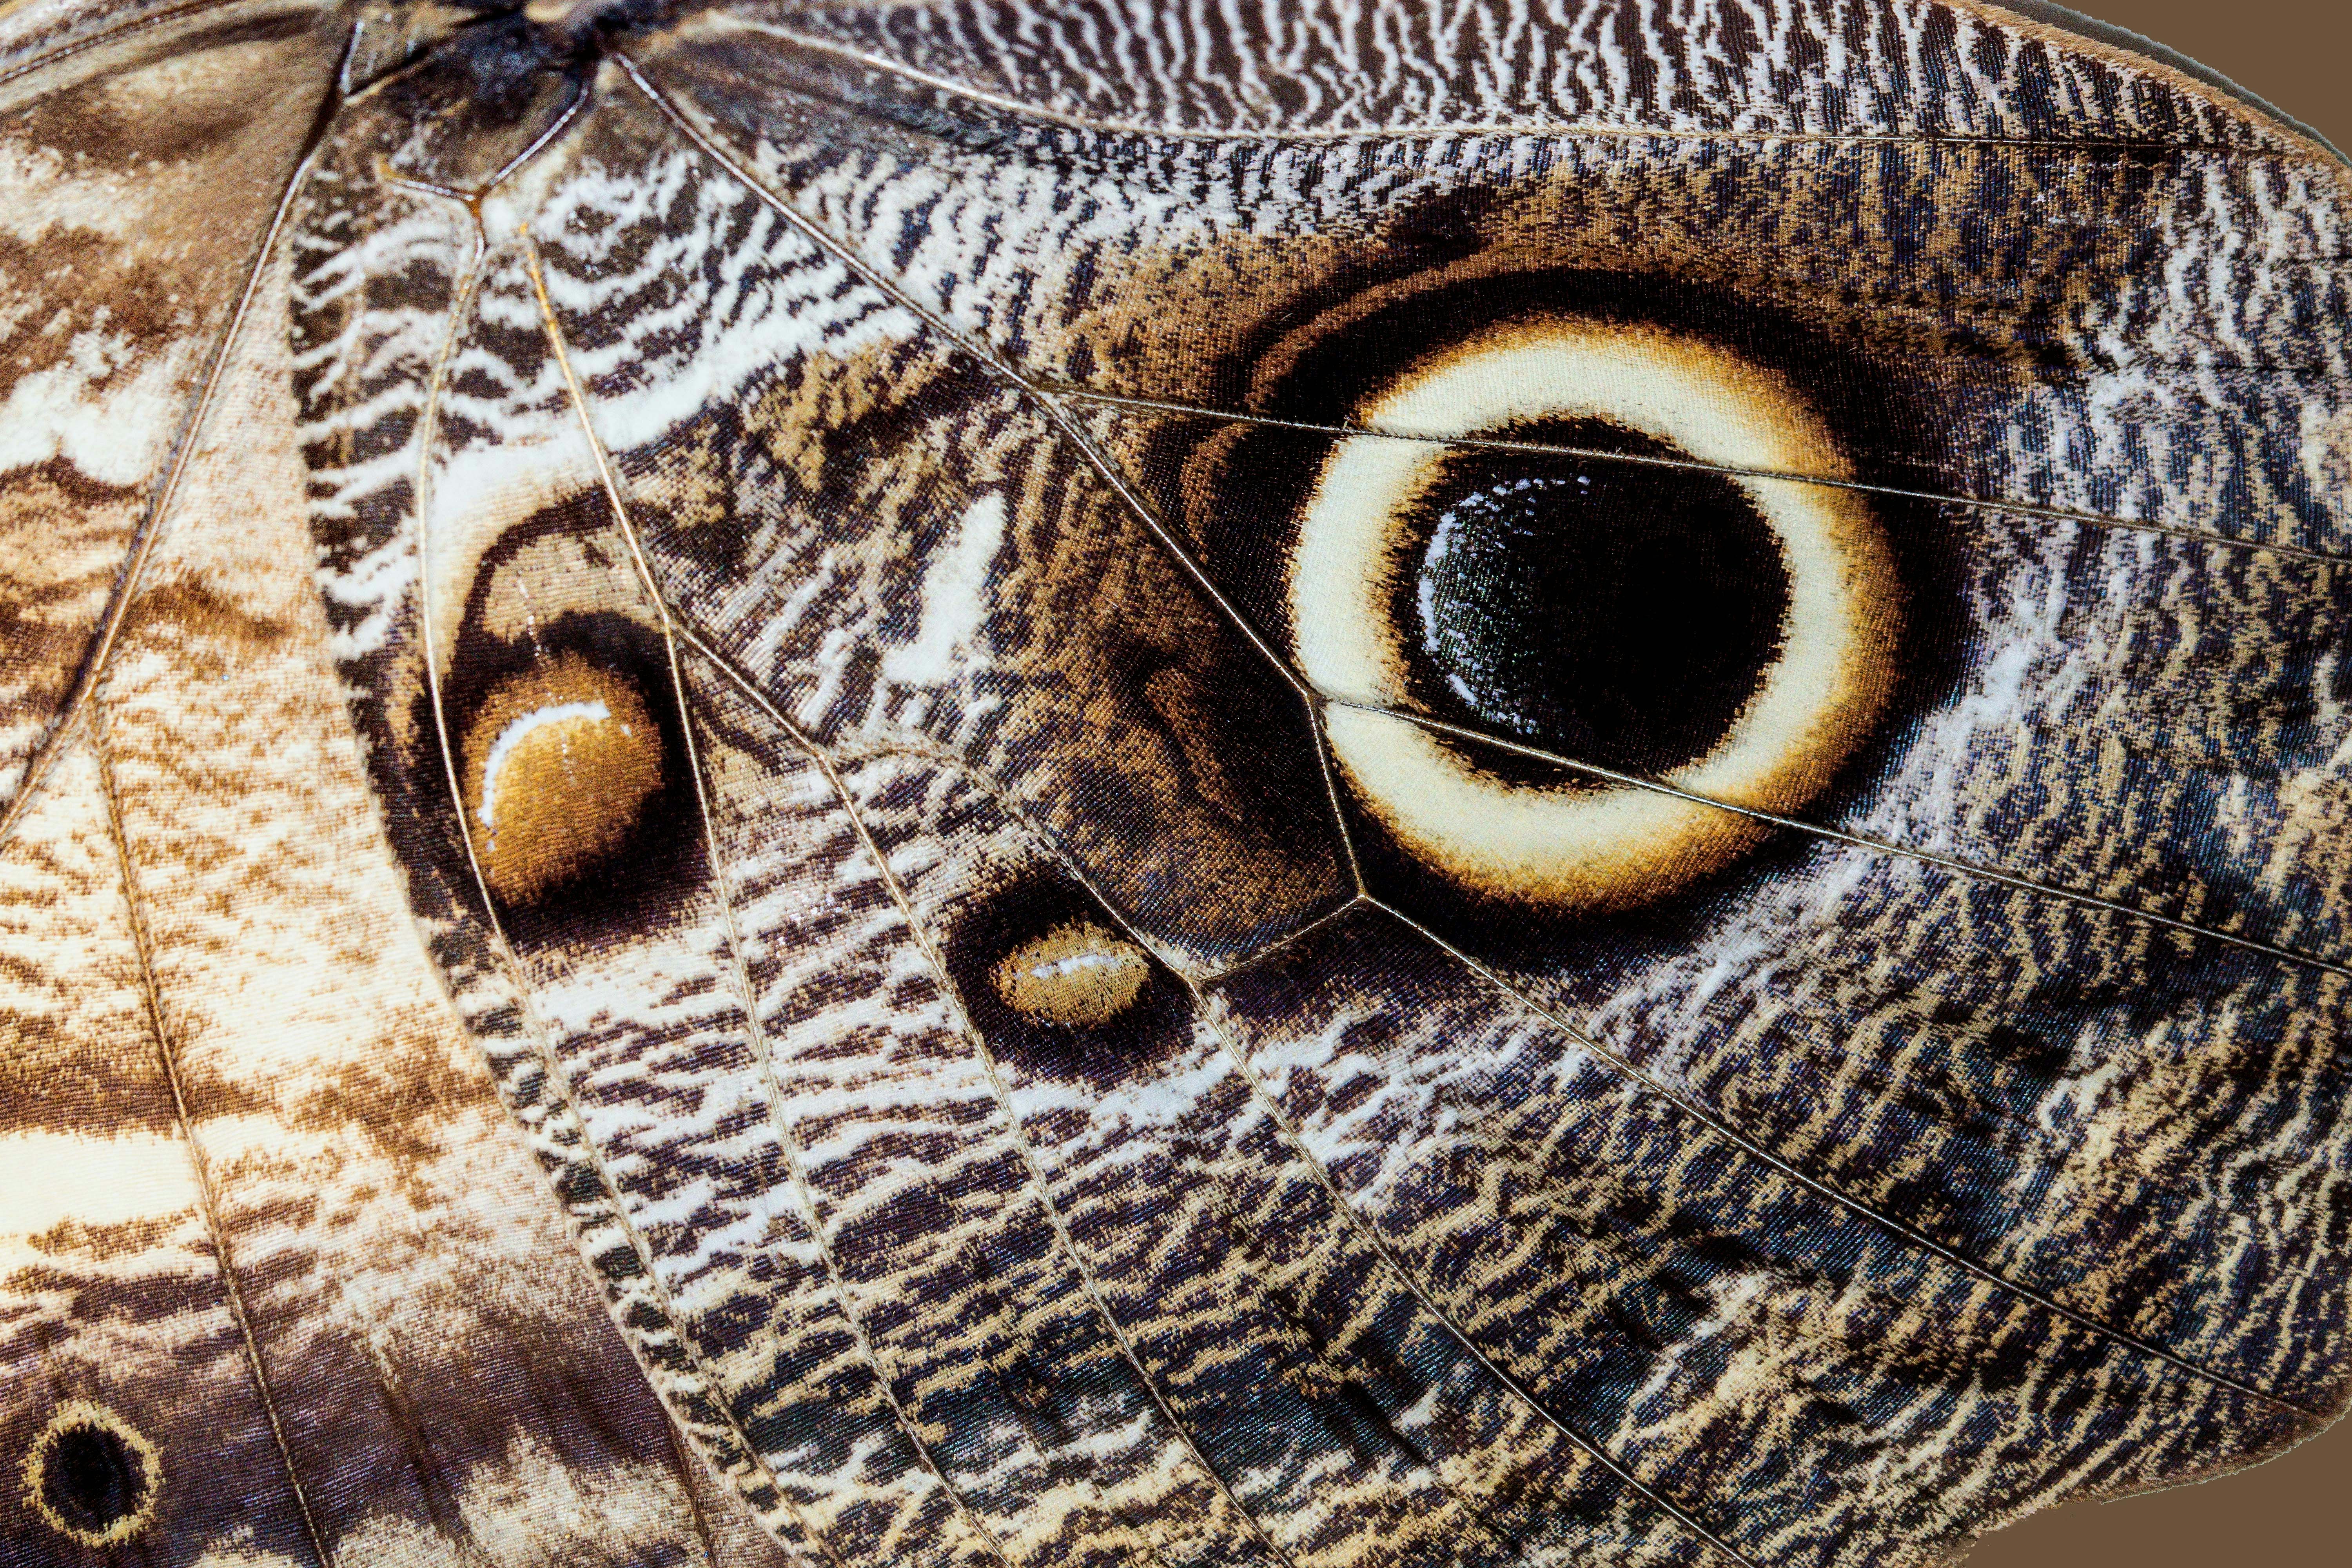 Close up of the wings of an Owl Butterfly Caligo memnon. The false eye spots help to deter predators. These butterflies are native to forests in Central and South America.